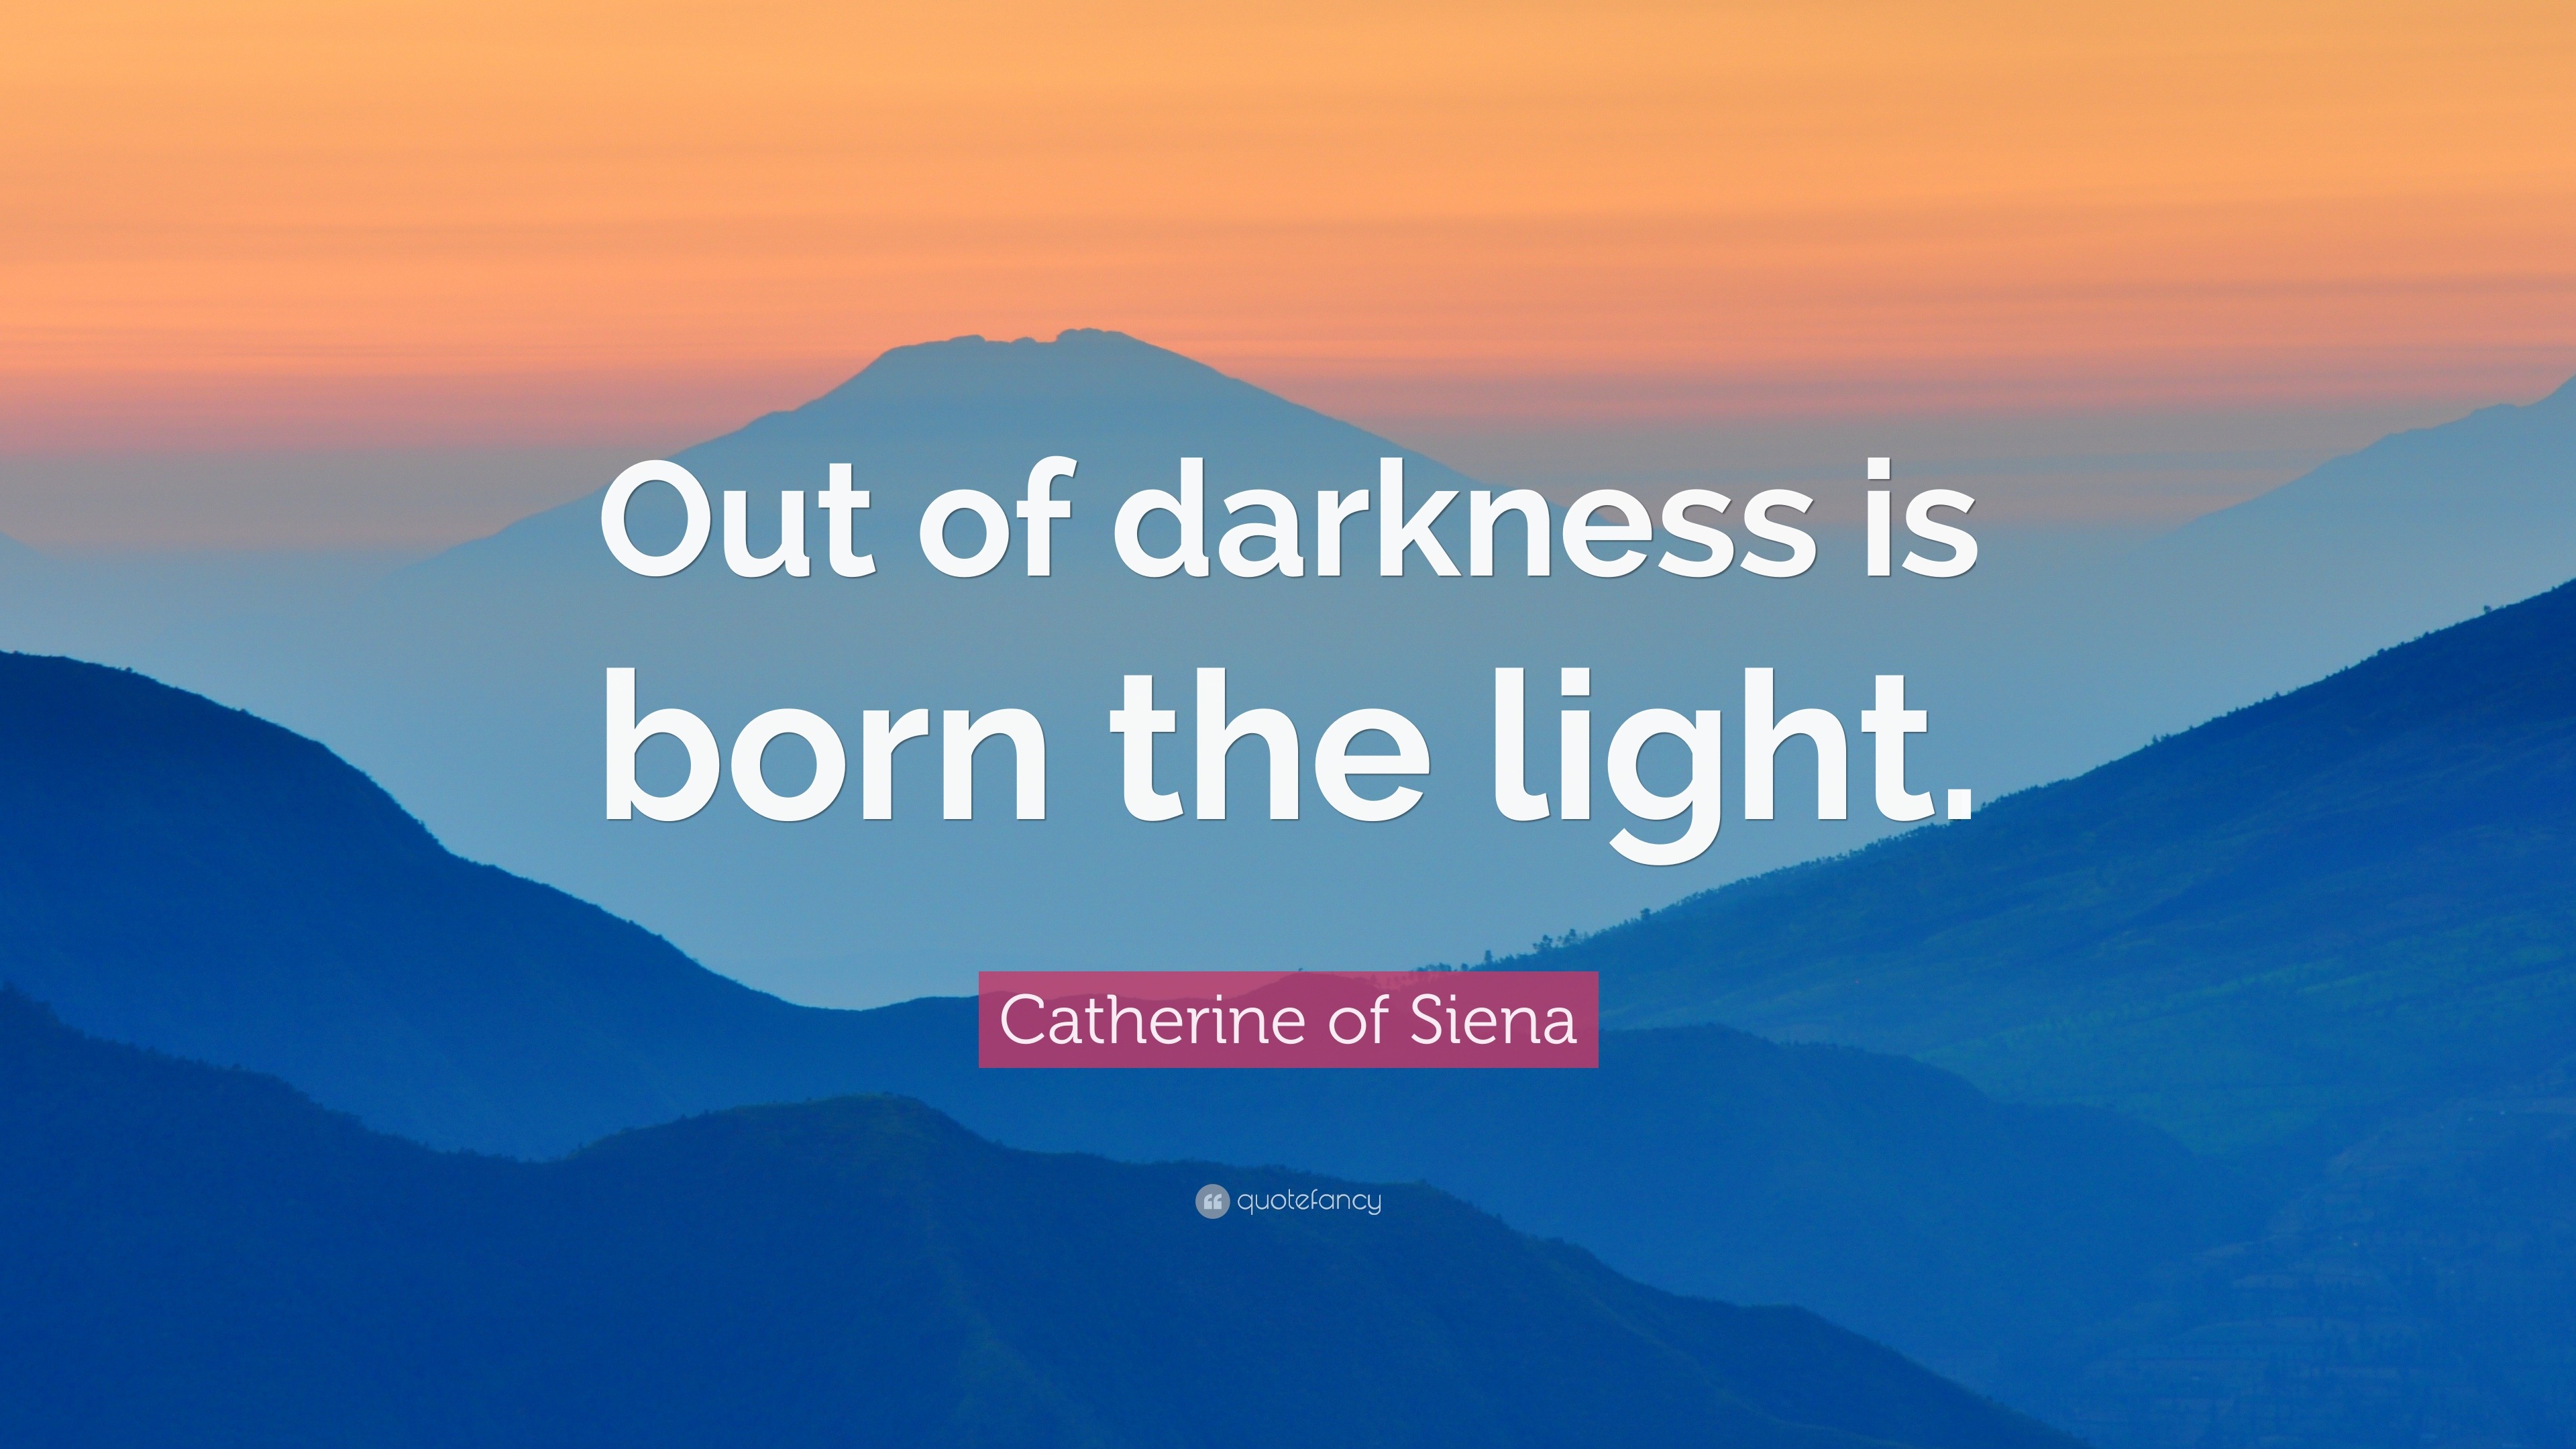 Catherine of Siena Quote “Out of darkness is born the light.”